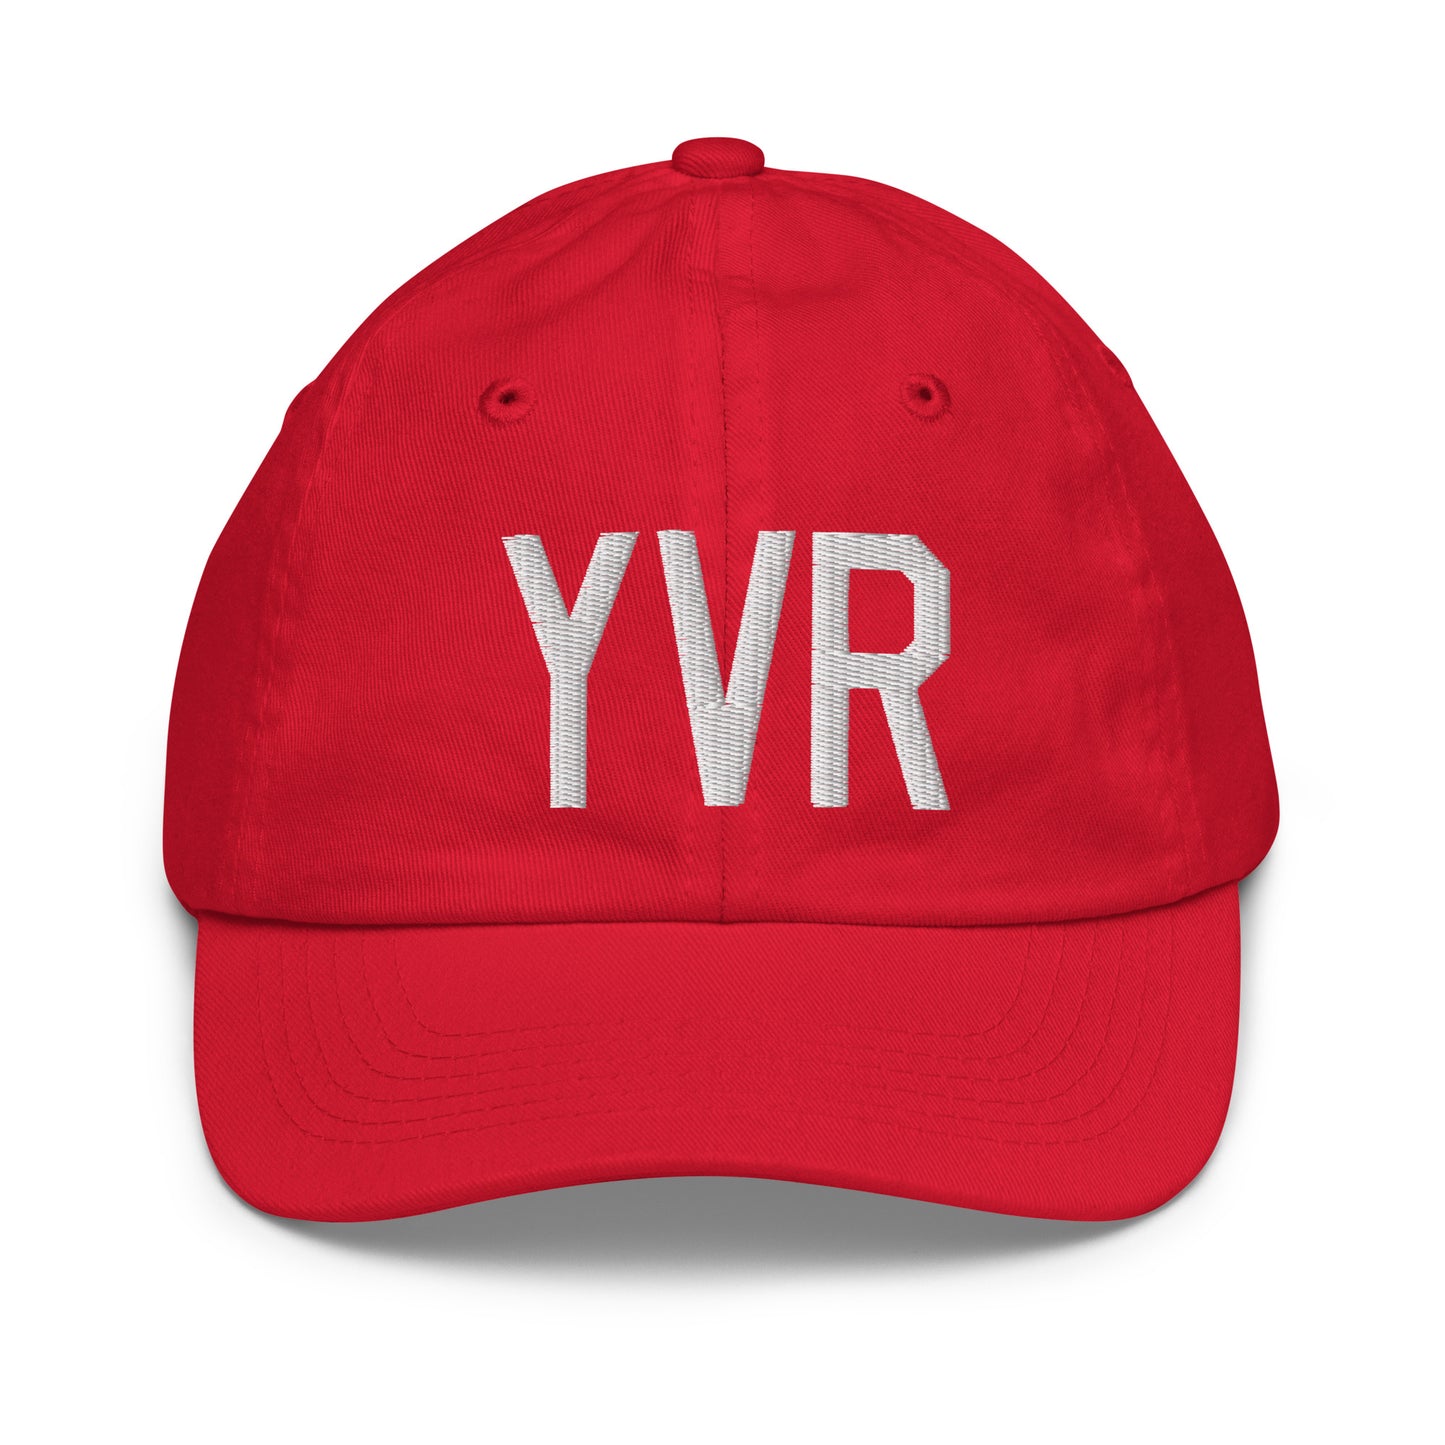 Airport Code Kid's Baseball Cap - White • YVR Vancouver • YHM Designs - Image 17